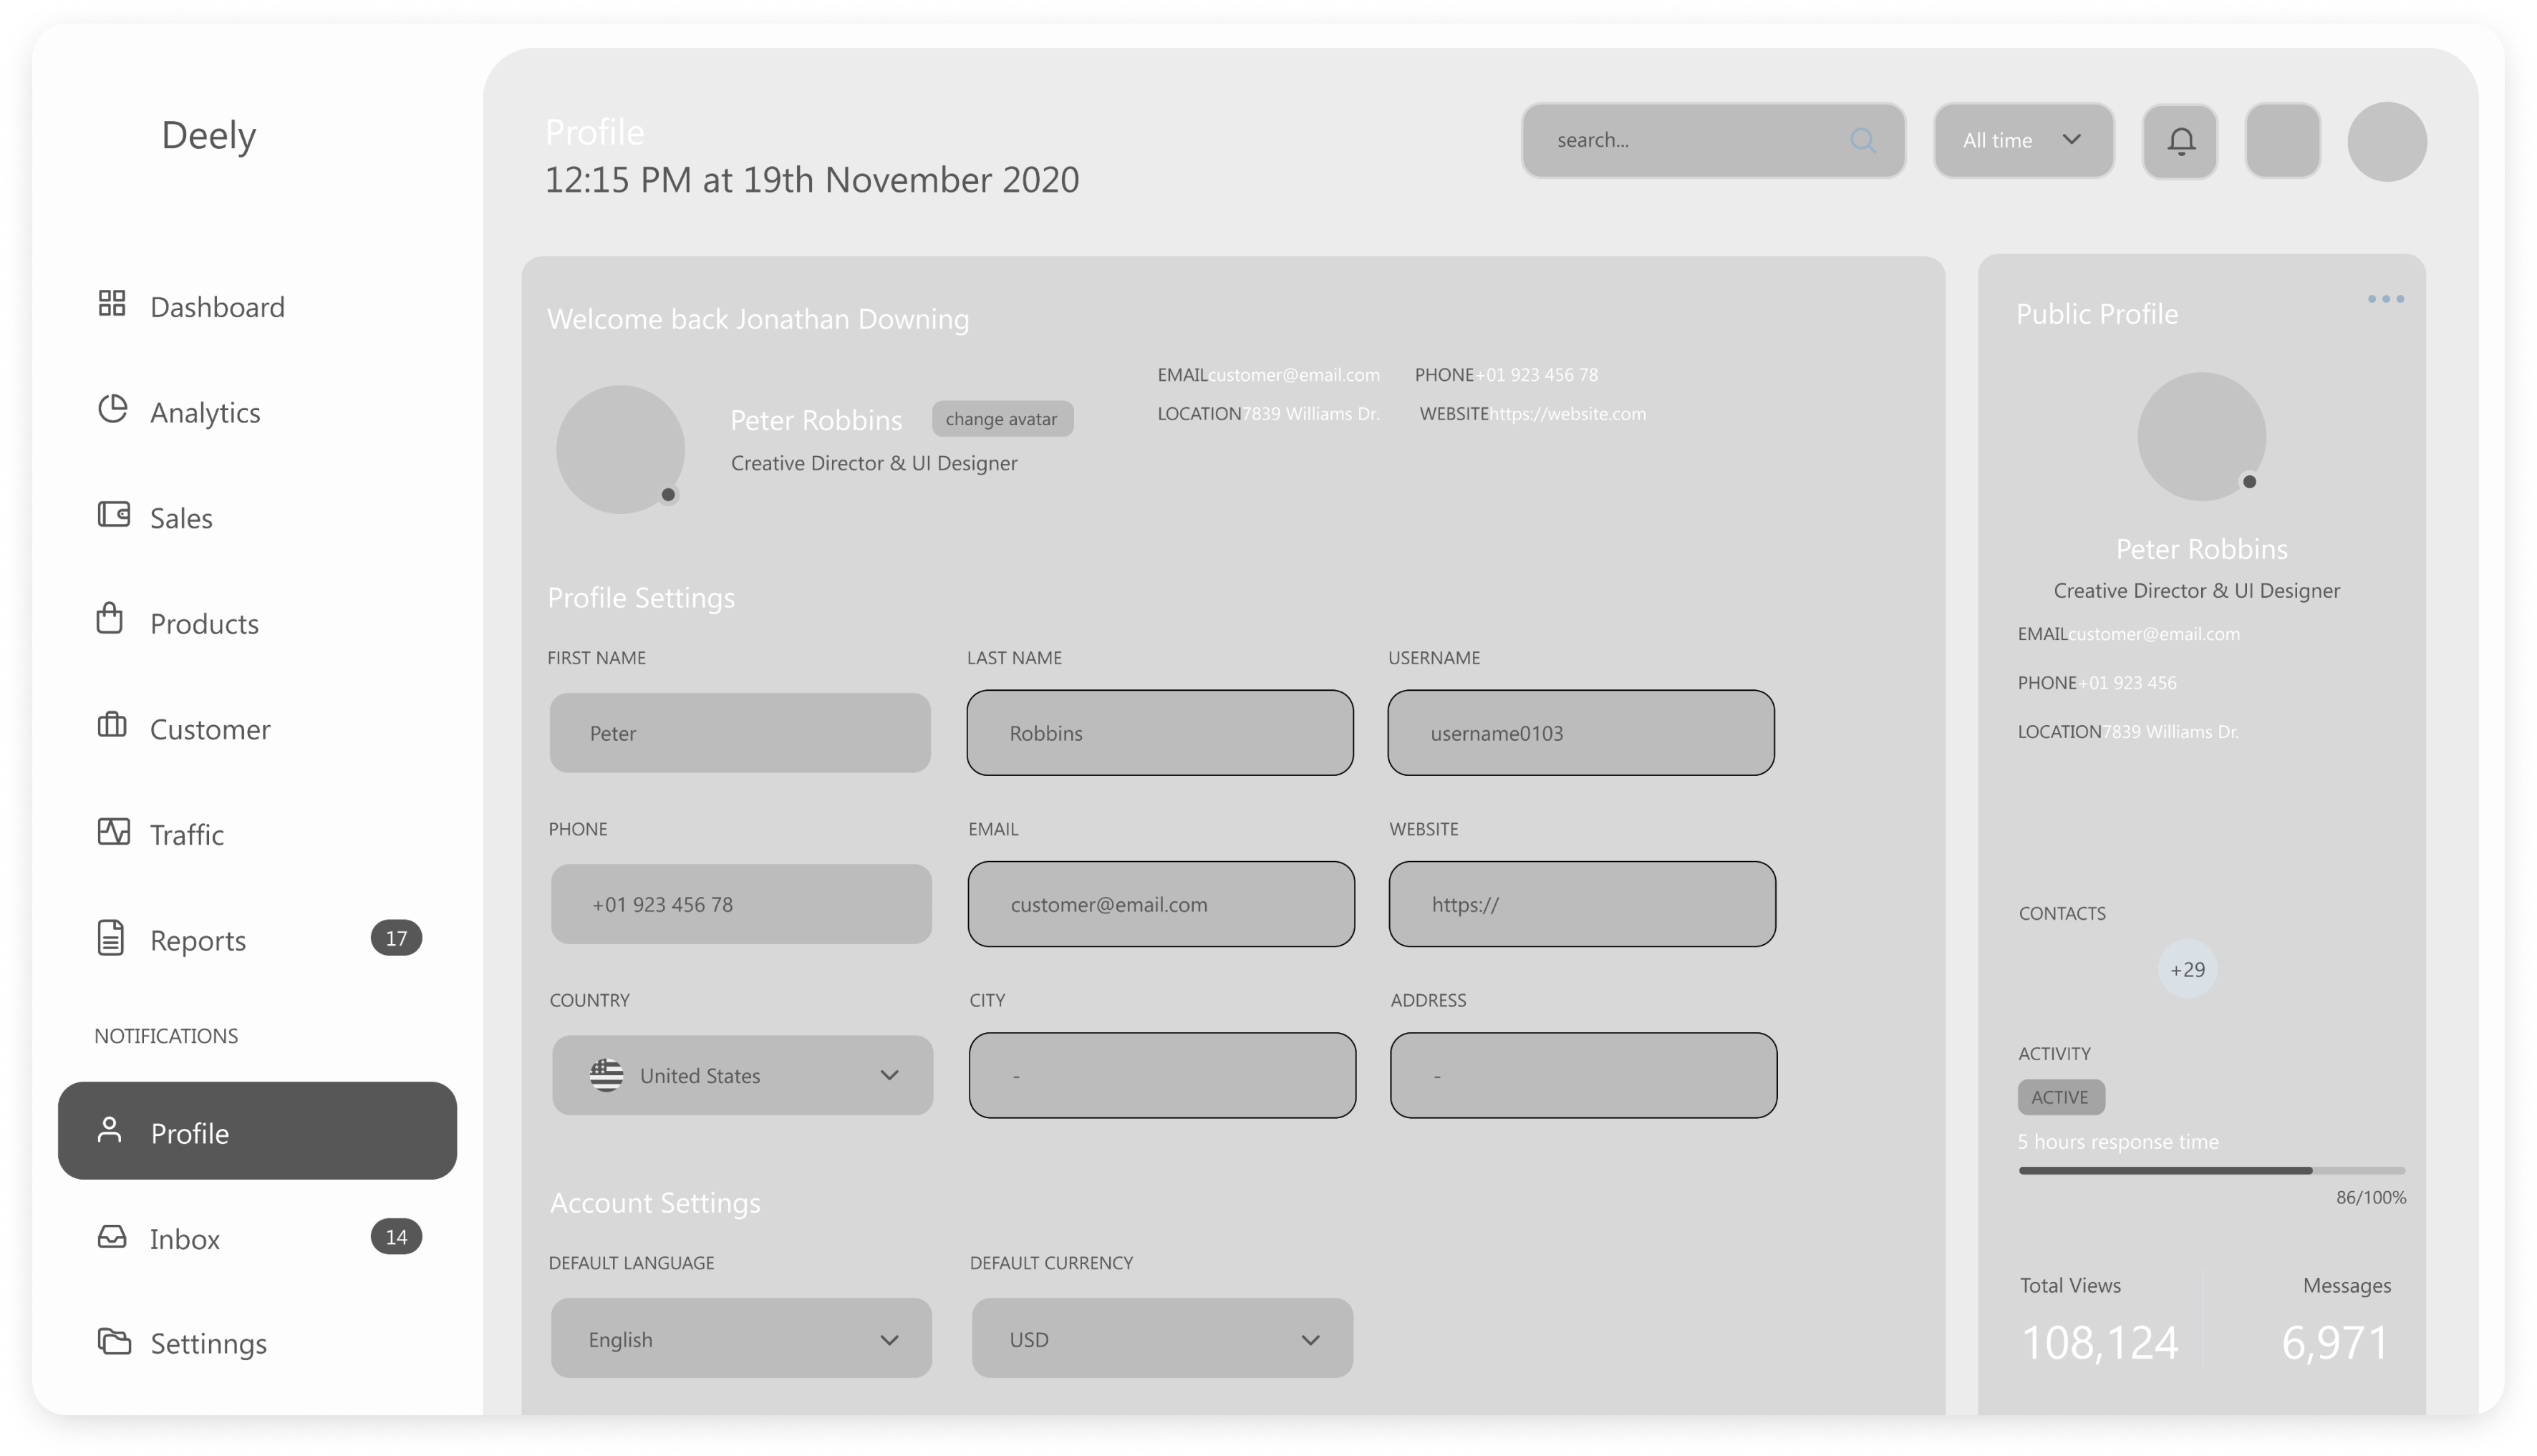 Wireframe of Deely profile dashboard screen